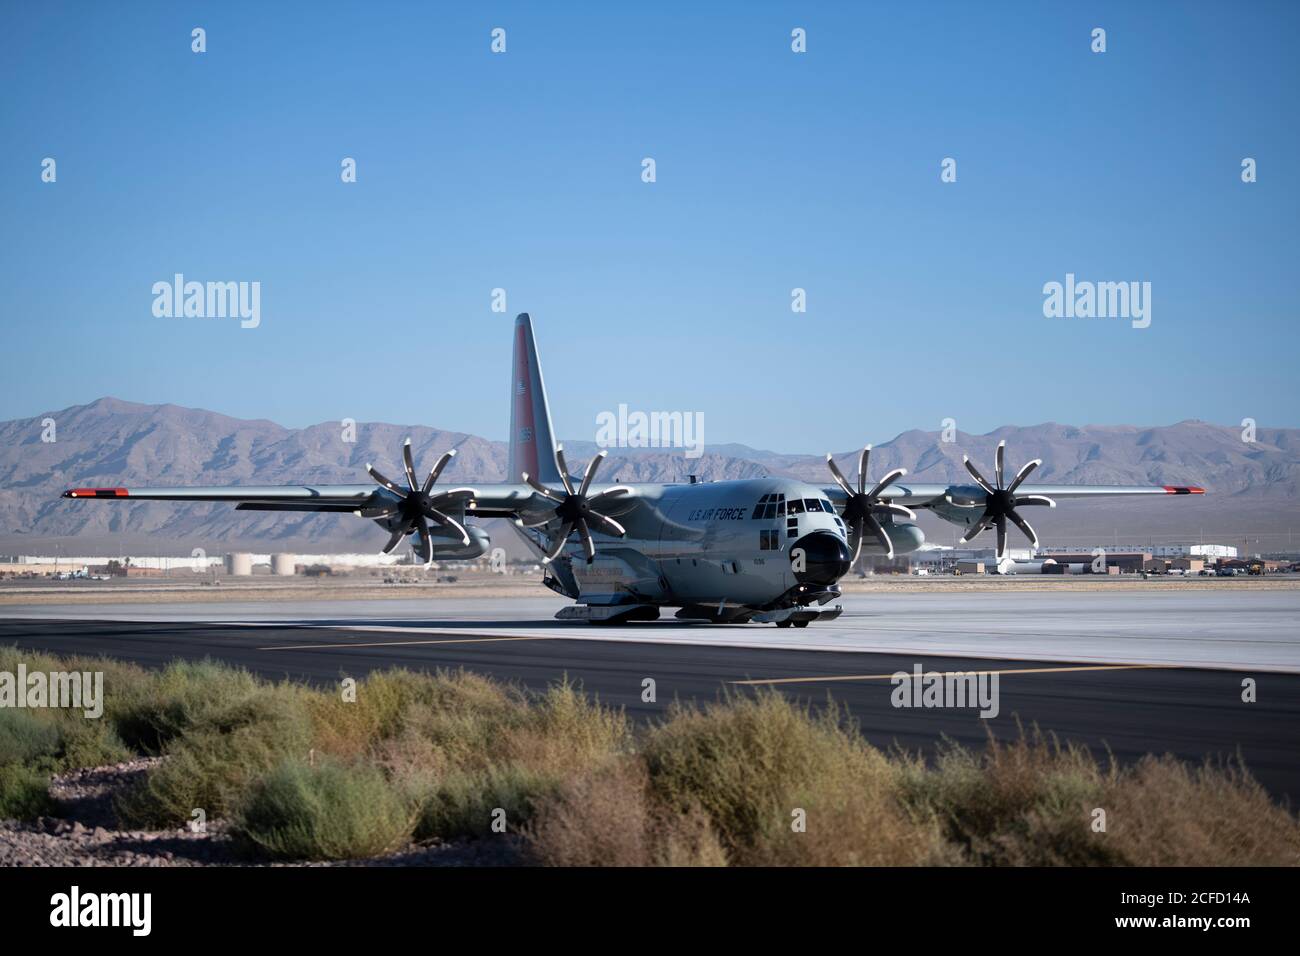 An LC-130 Hercules from the 109th Airlift Wing taxis to a simulated austere base during the Advanced Battle Management System exercise on Nellis Air Force Base, Nev., Sept. 3, 2020. The ABMS is an interconnected battle network - the digital architecture or foundation - which collects, processes and shares data relevant to warfighters in order to make better decisions faster in the kill chain. In order to achieve all-domain superiority, it requires that individual military activities not simply be de-conflicted, but rather integrated – activities in one domain must enhance the effectiveness of Stock Photo